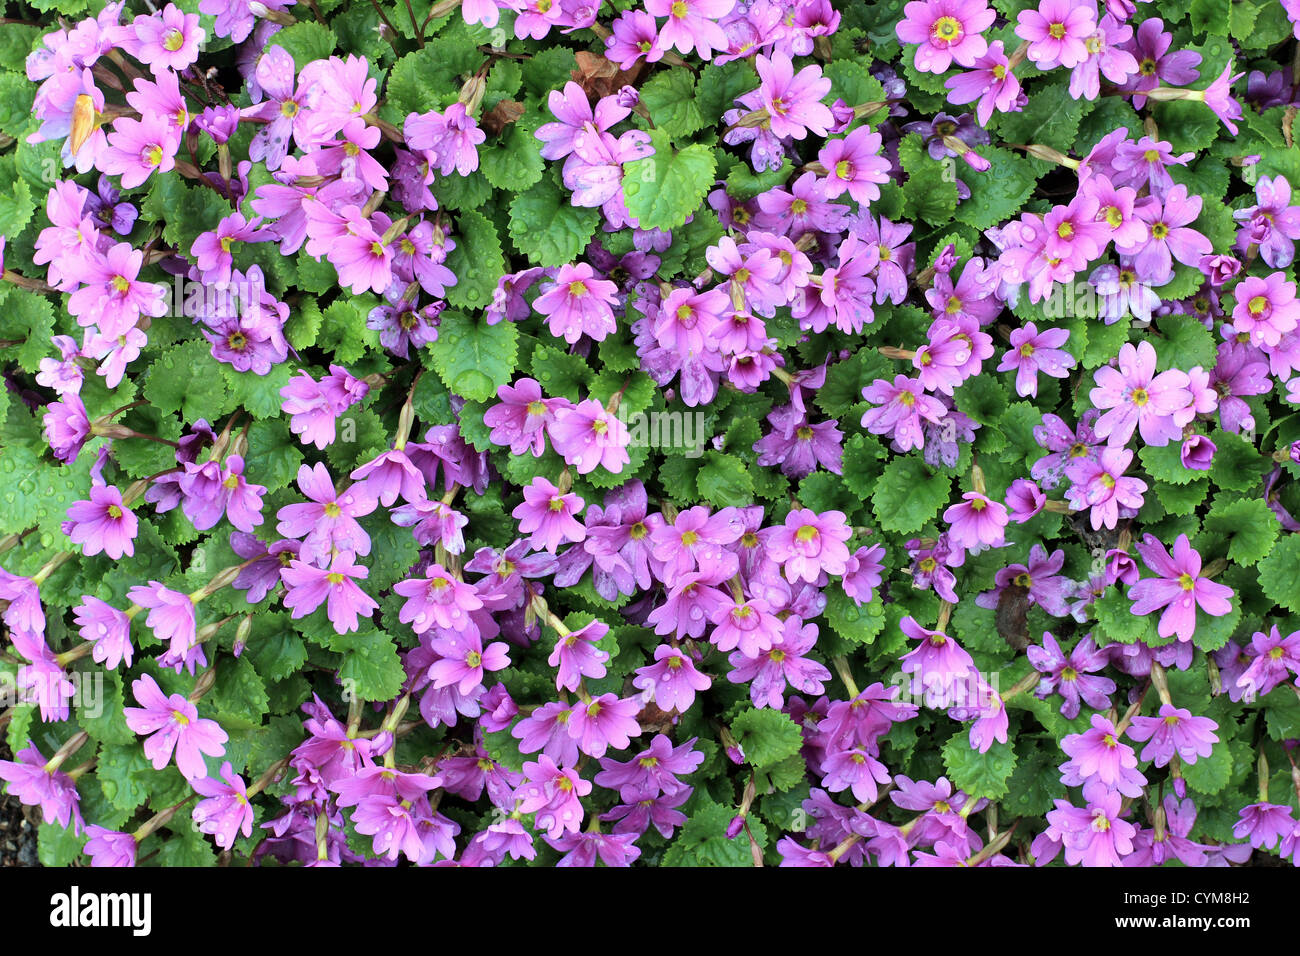 A bunch of pink flowers growing on a small shrub. Intense colour gives almost painterly effect, natural colors and light Stock Photo